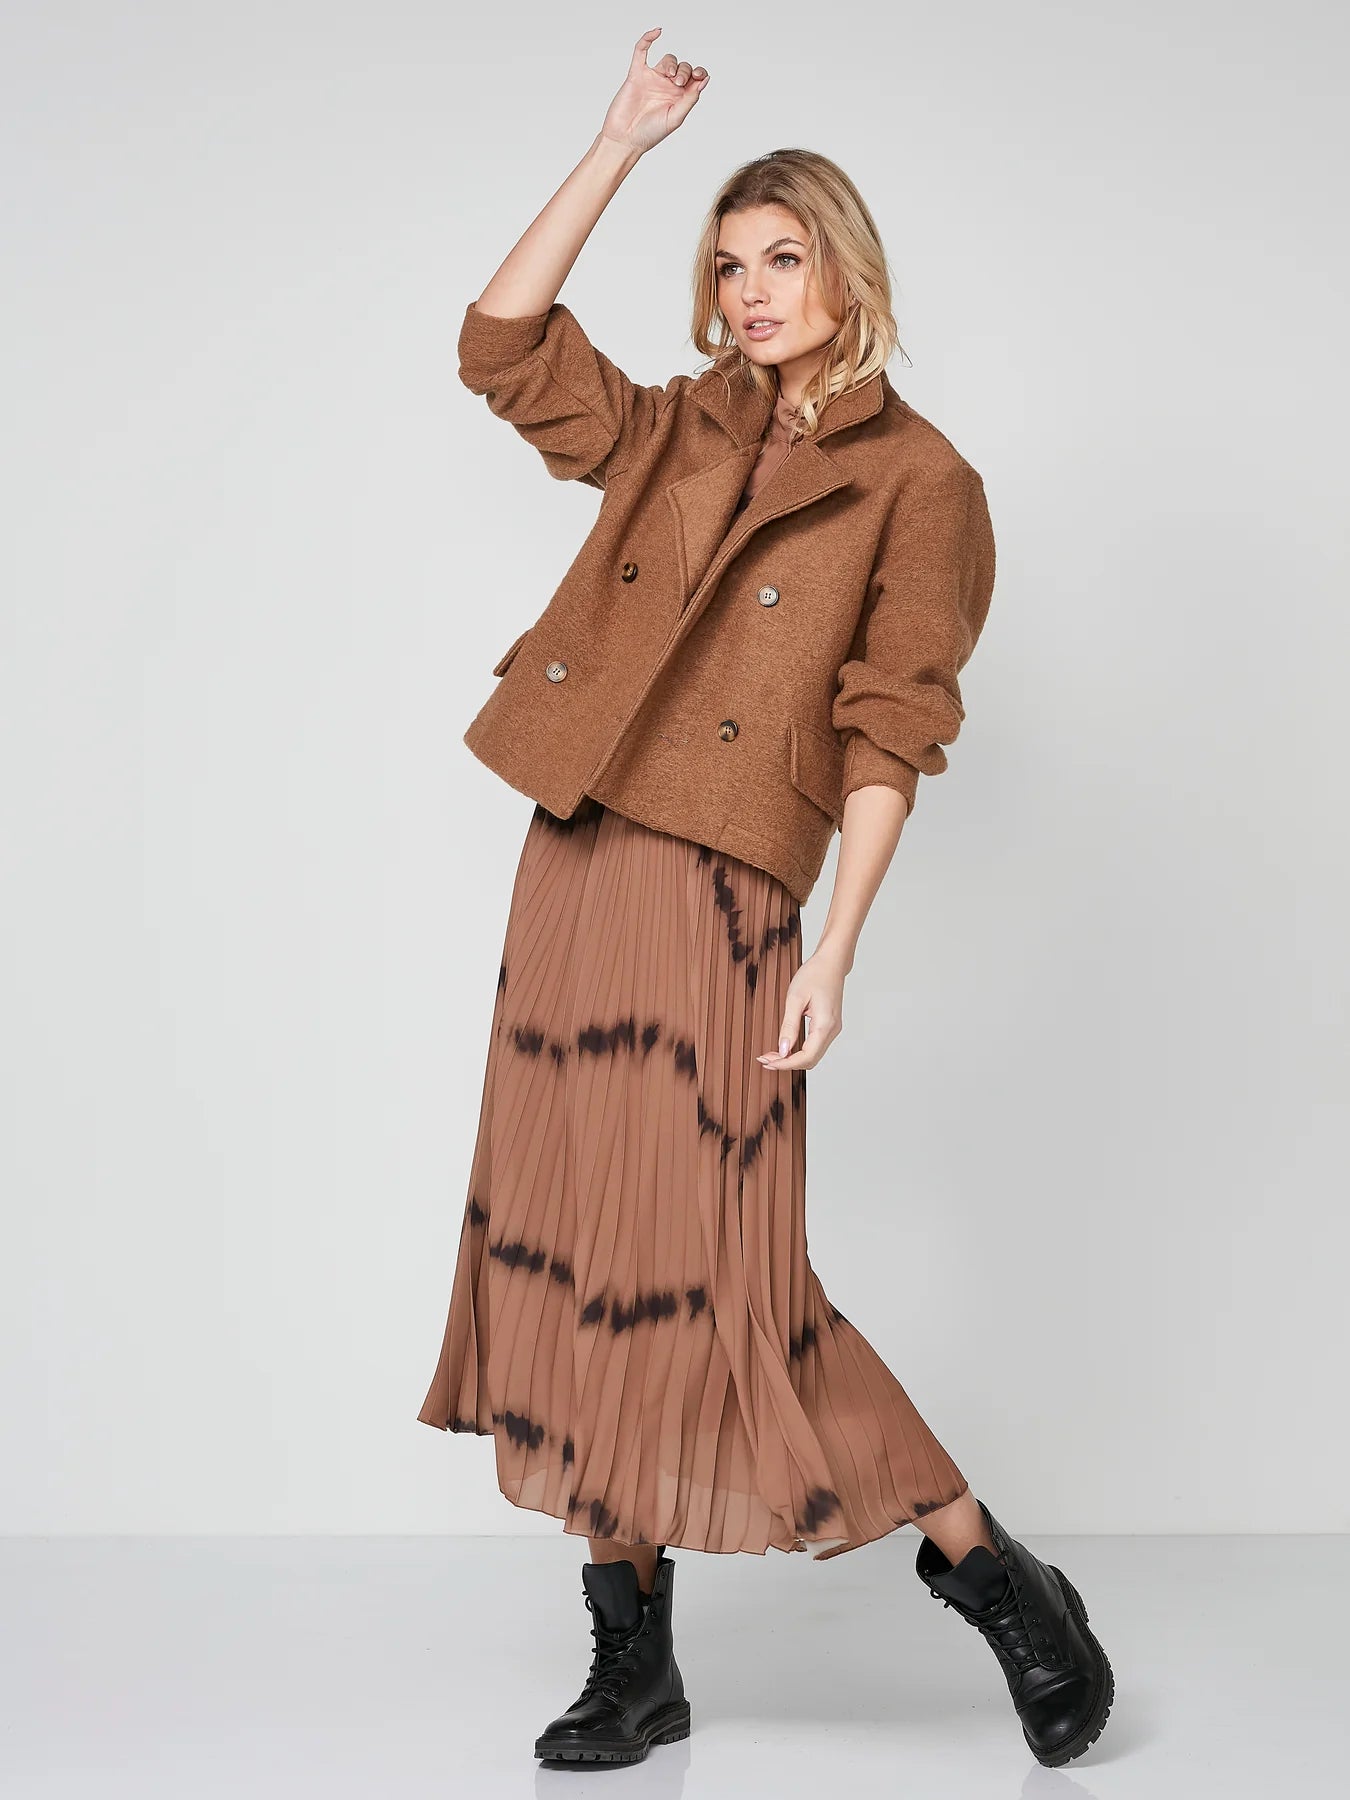 Rigmor Pleated Skirt in Toffee Brown Mix